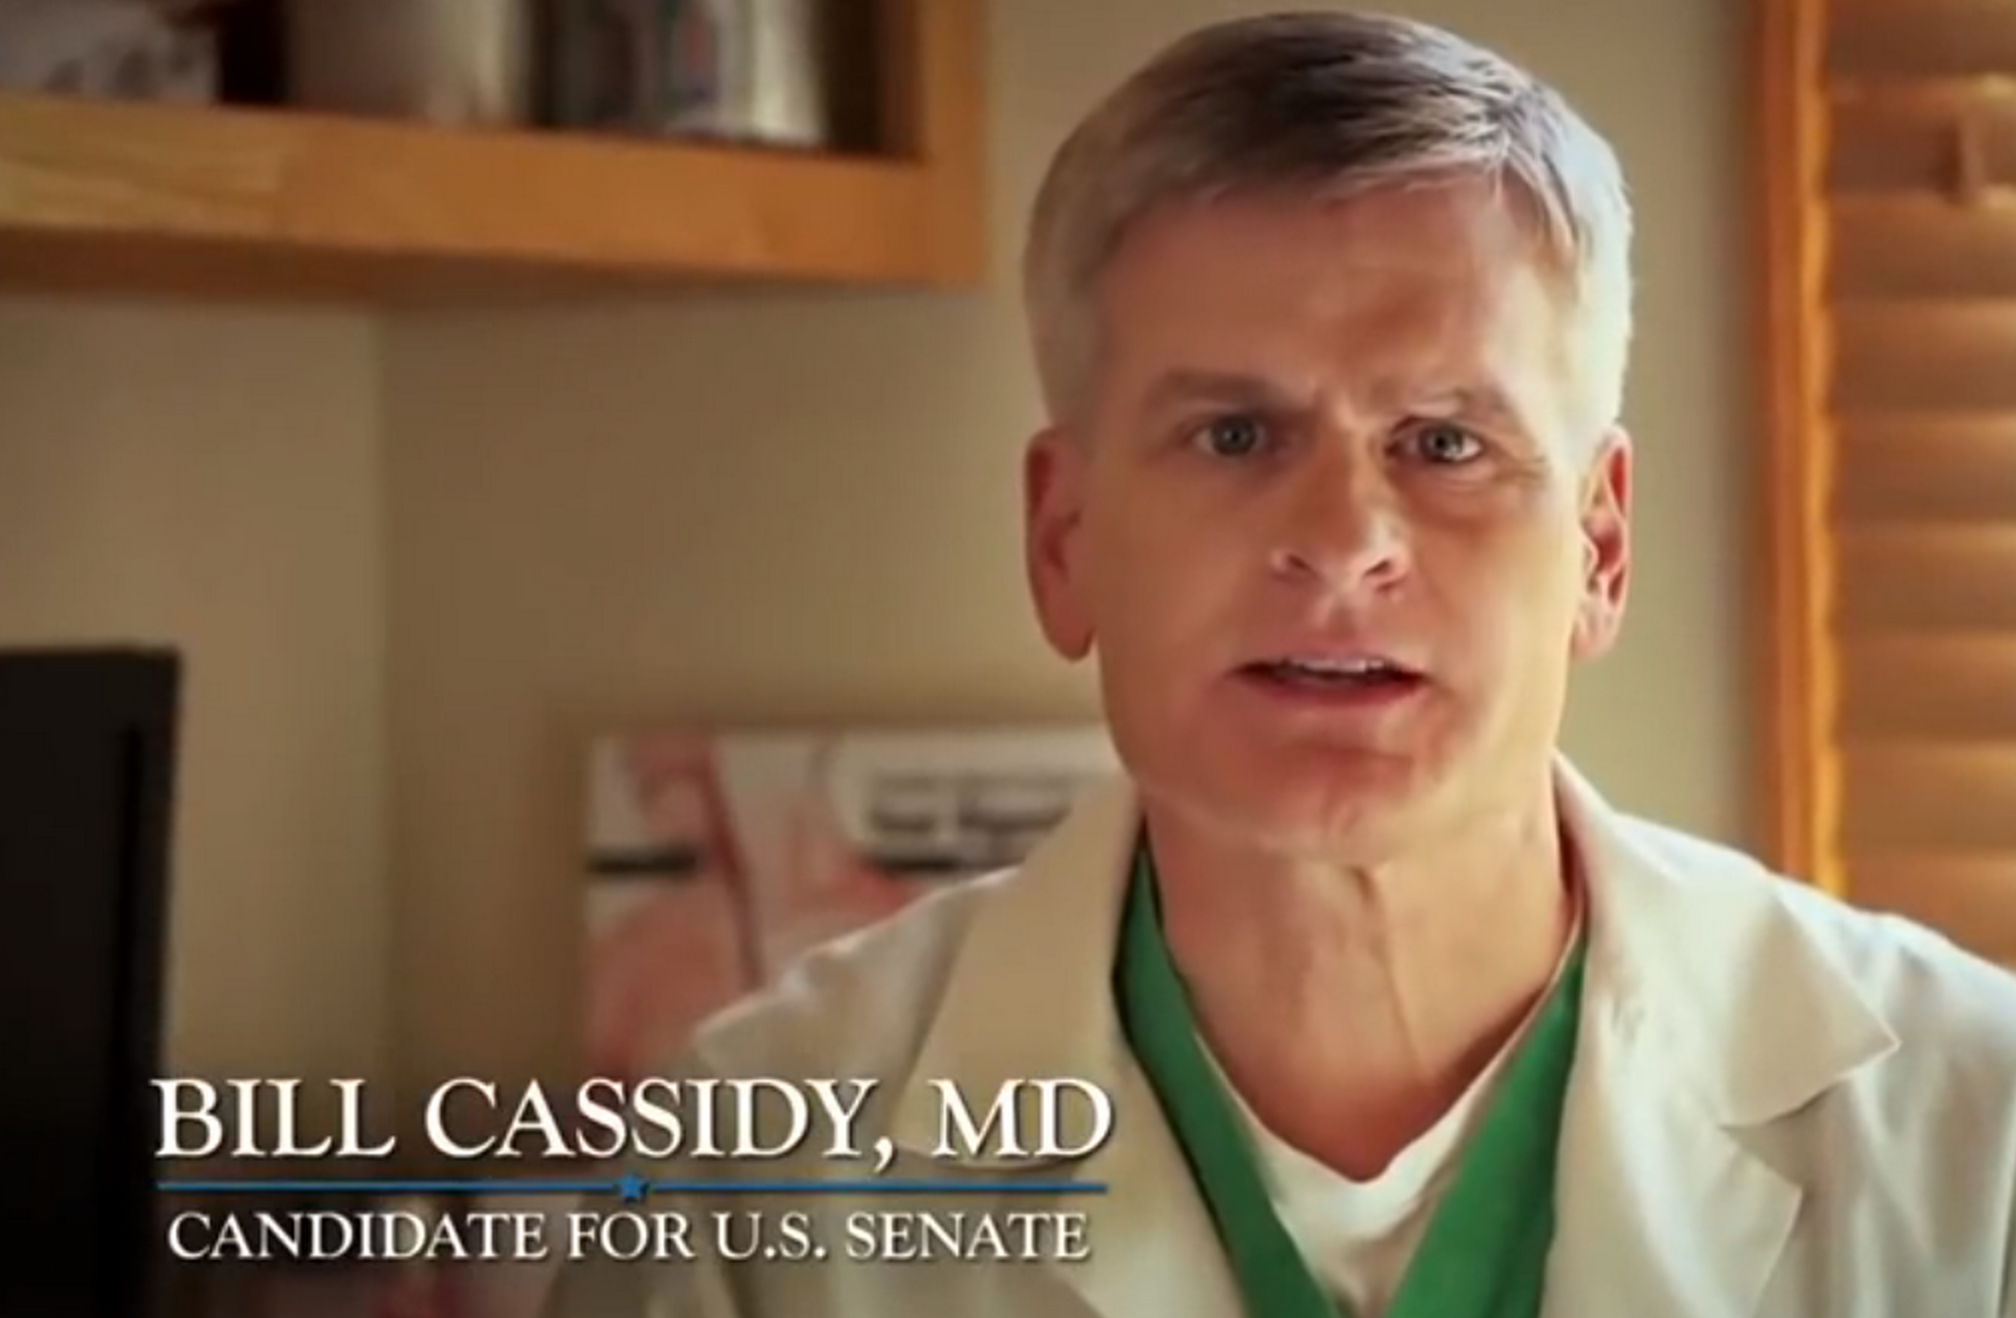 “Double Bill” Cassidy: For Years, Bill Cassidy Billed LSU While
Working In Congress